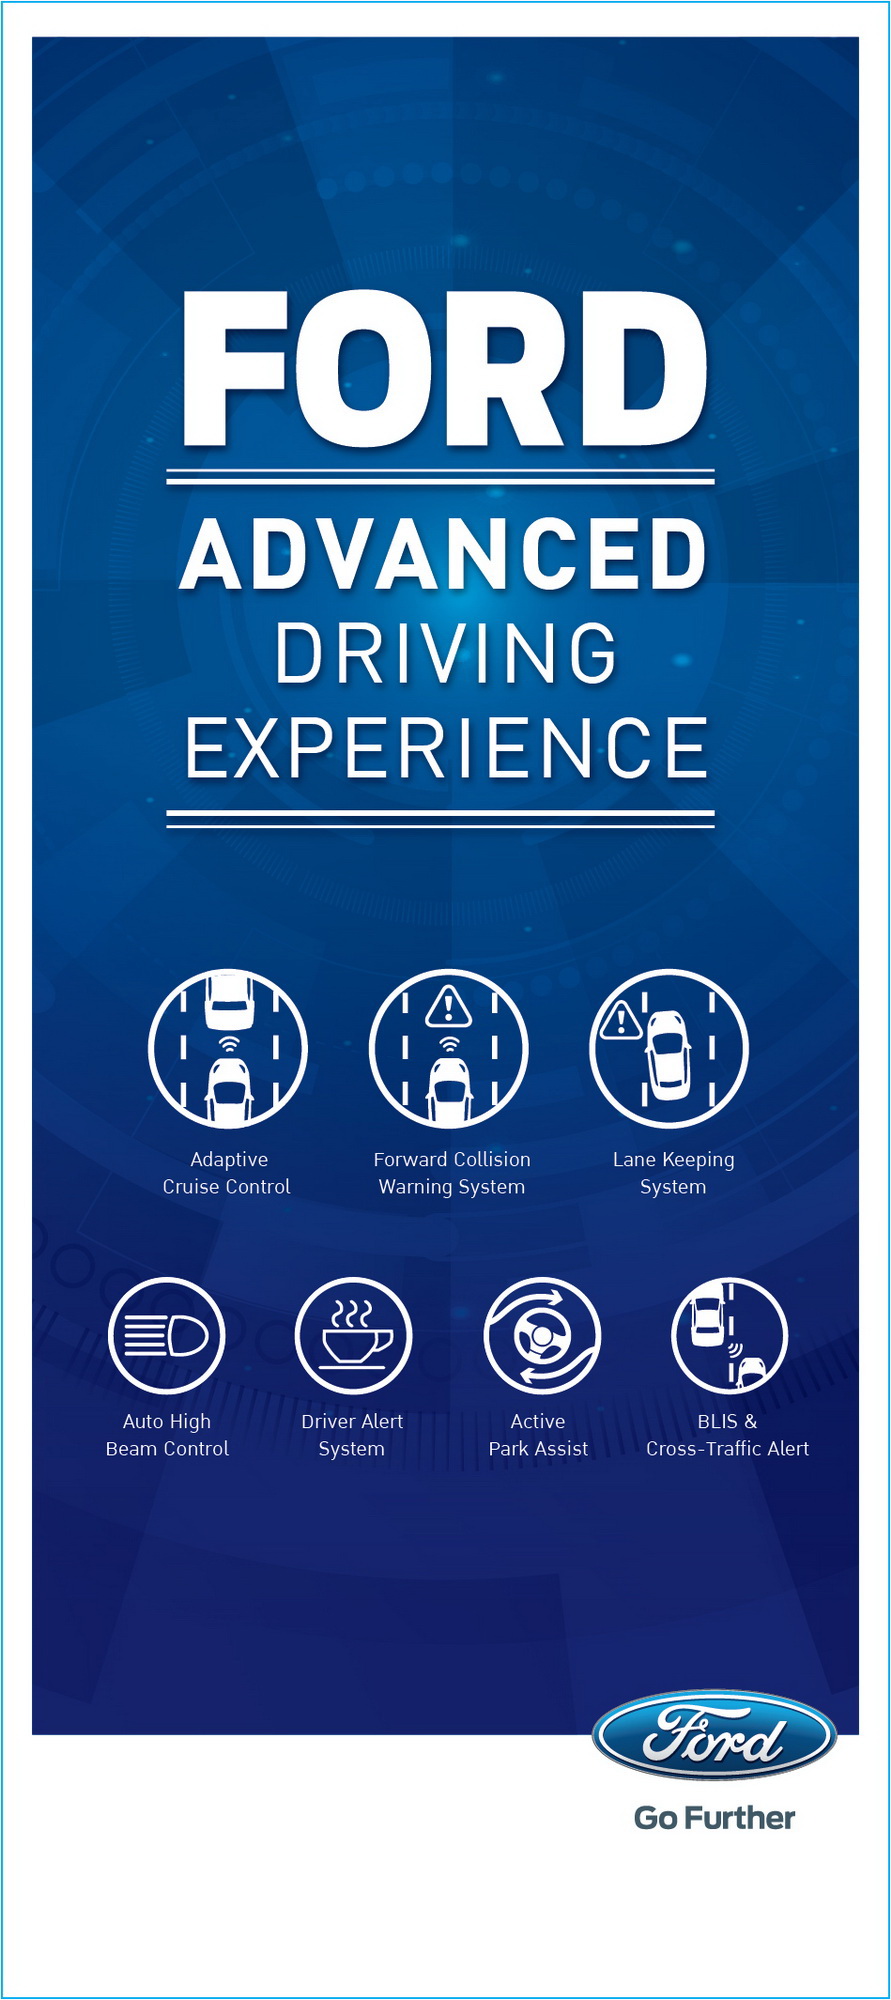 Ford Advanced Driving Experience1